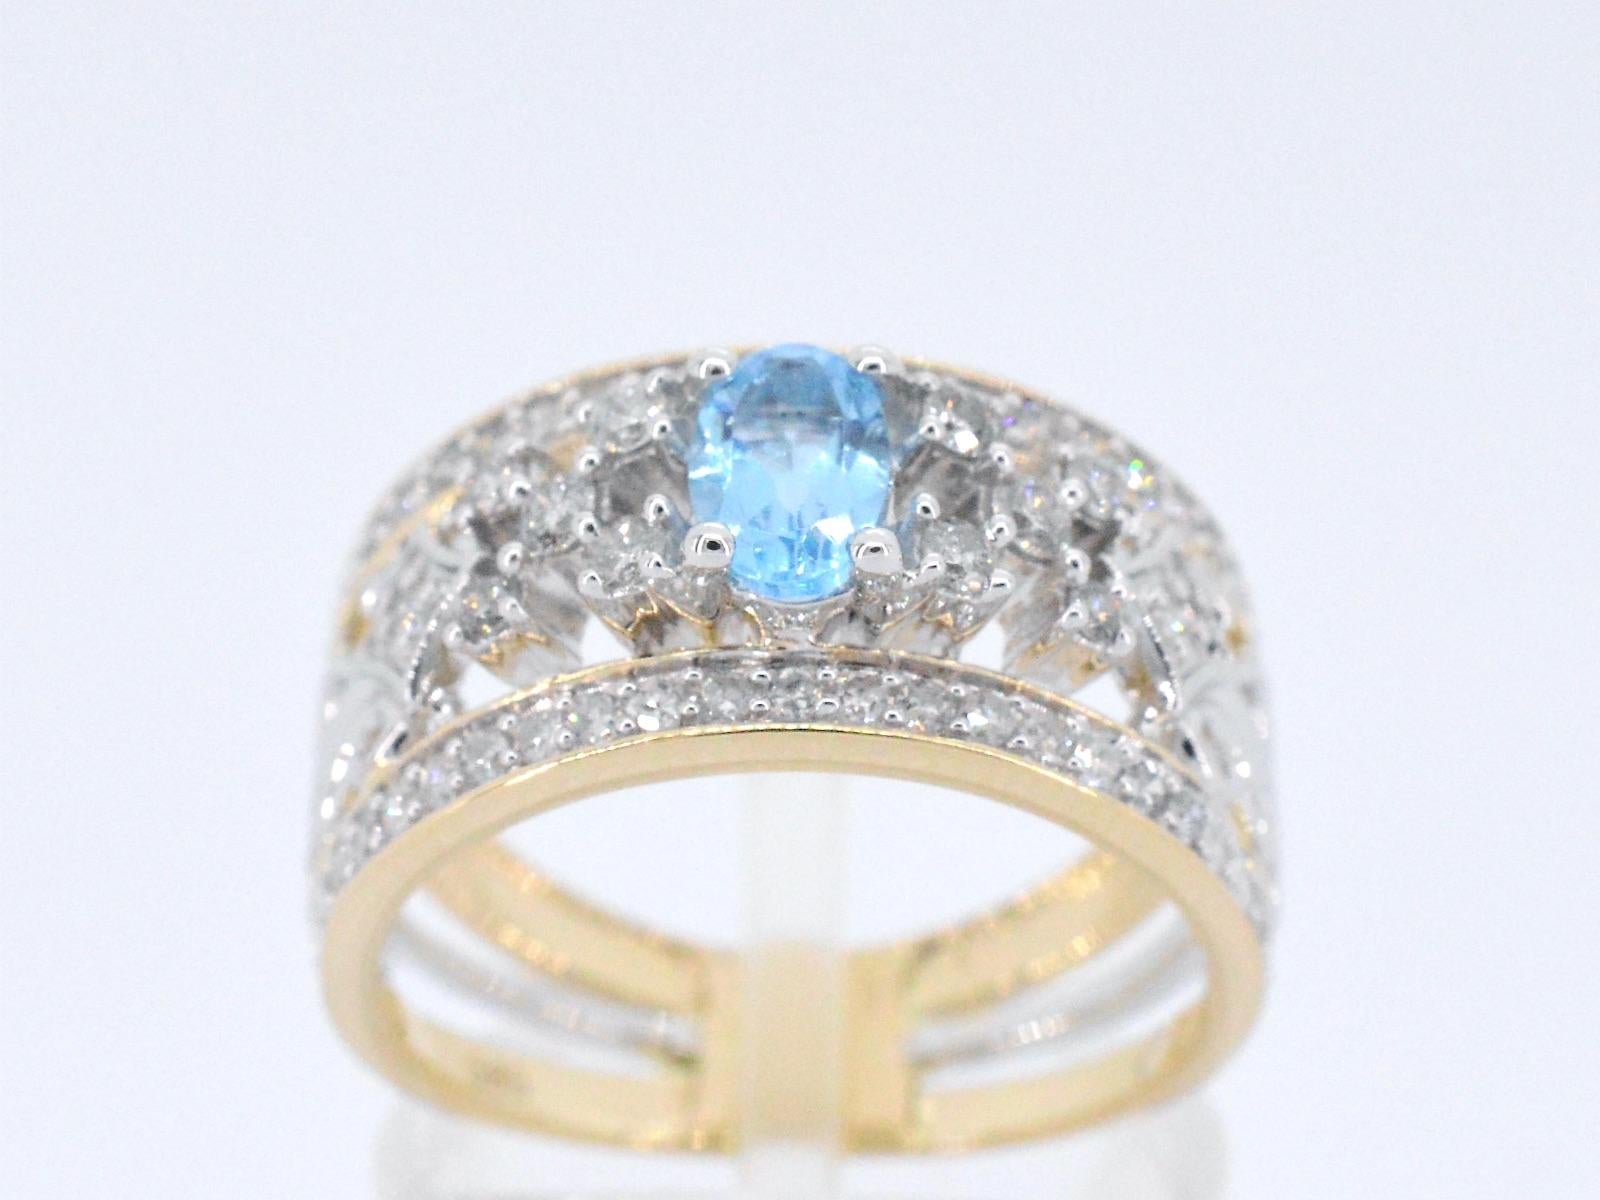 This exclusive gold ring is a beautiful piece of jewelry that features sparkling diamonds and a stunning topaz. The diamonds are expertly set in the gold band to create a seamless and elegant look that catches the light beautifully. The topaz adds a